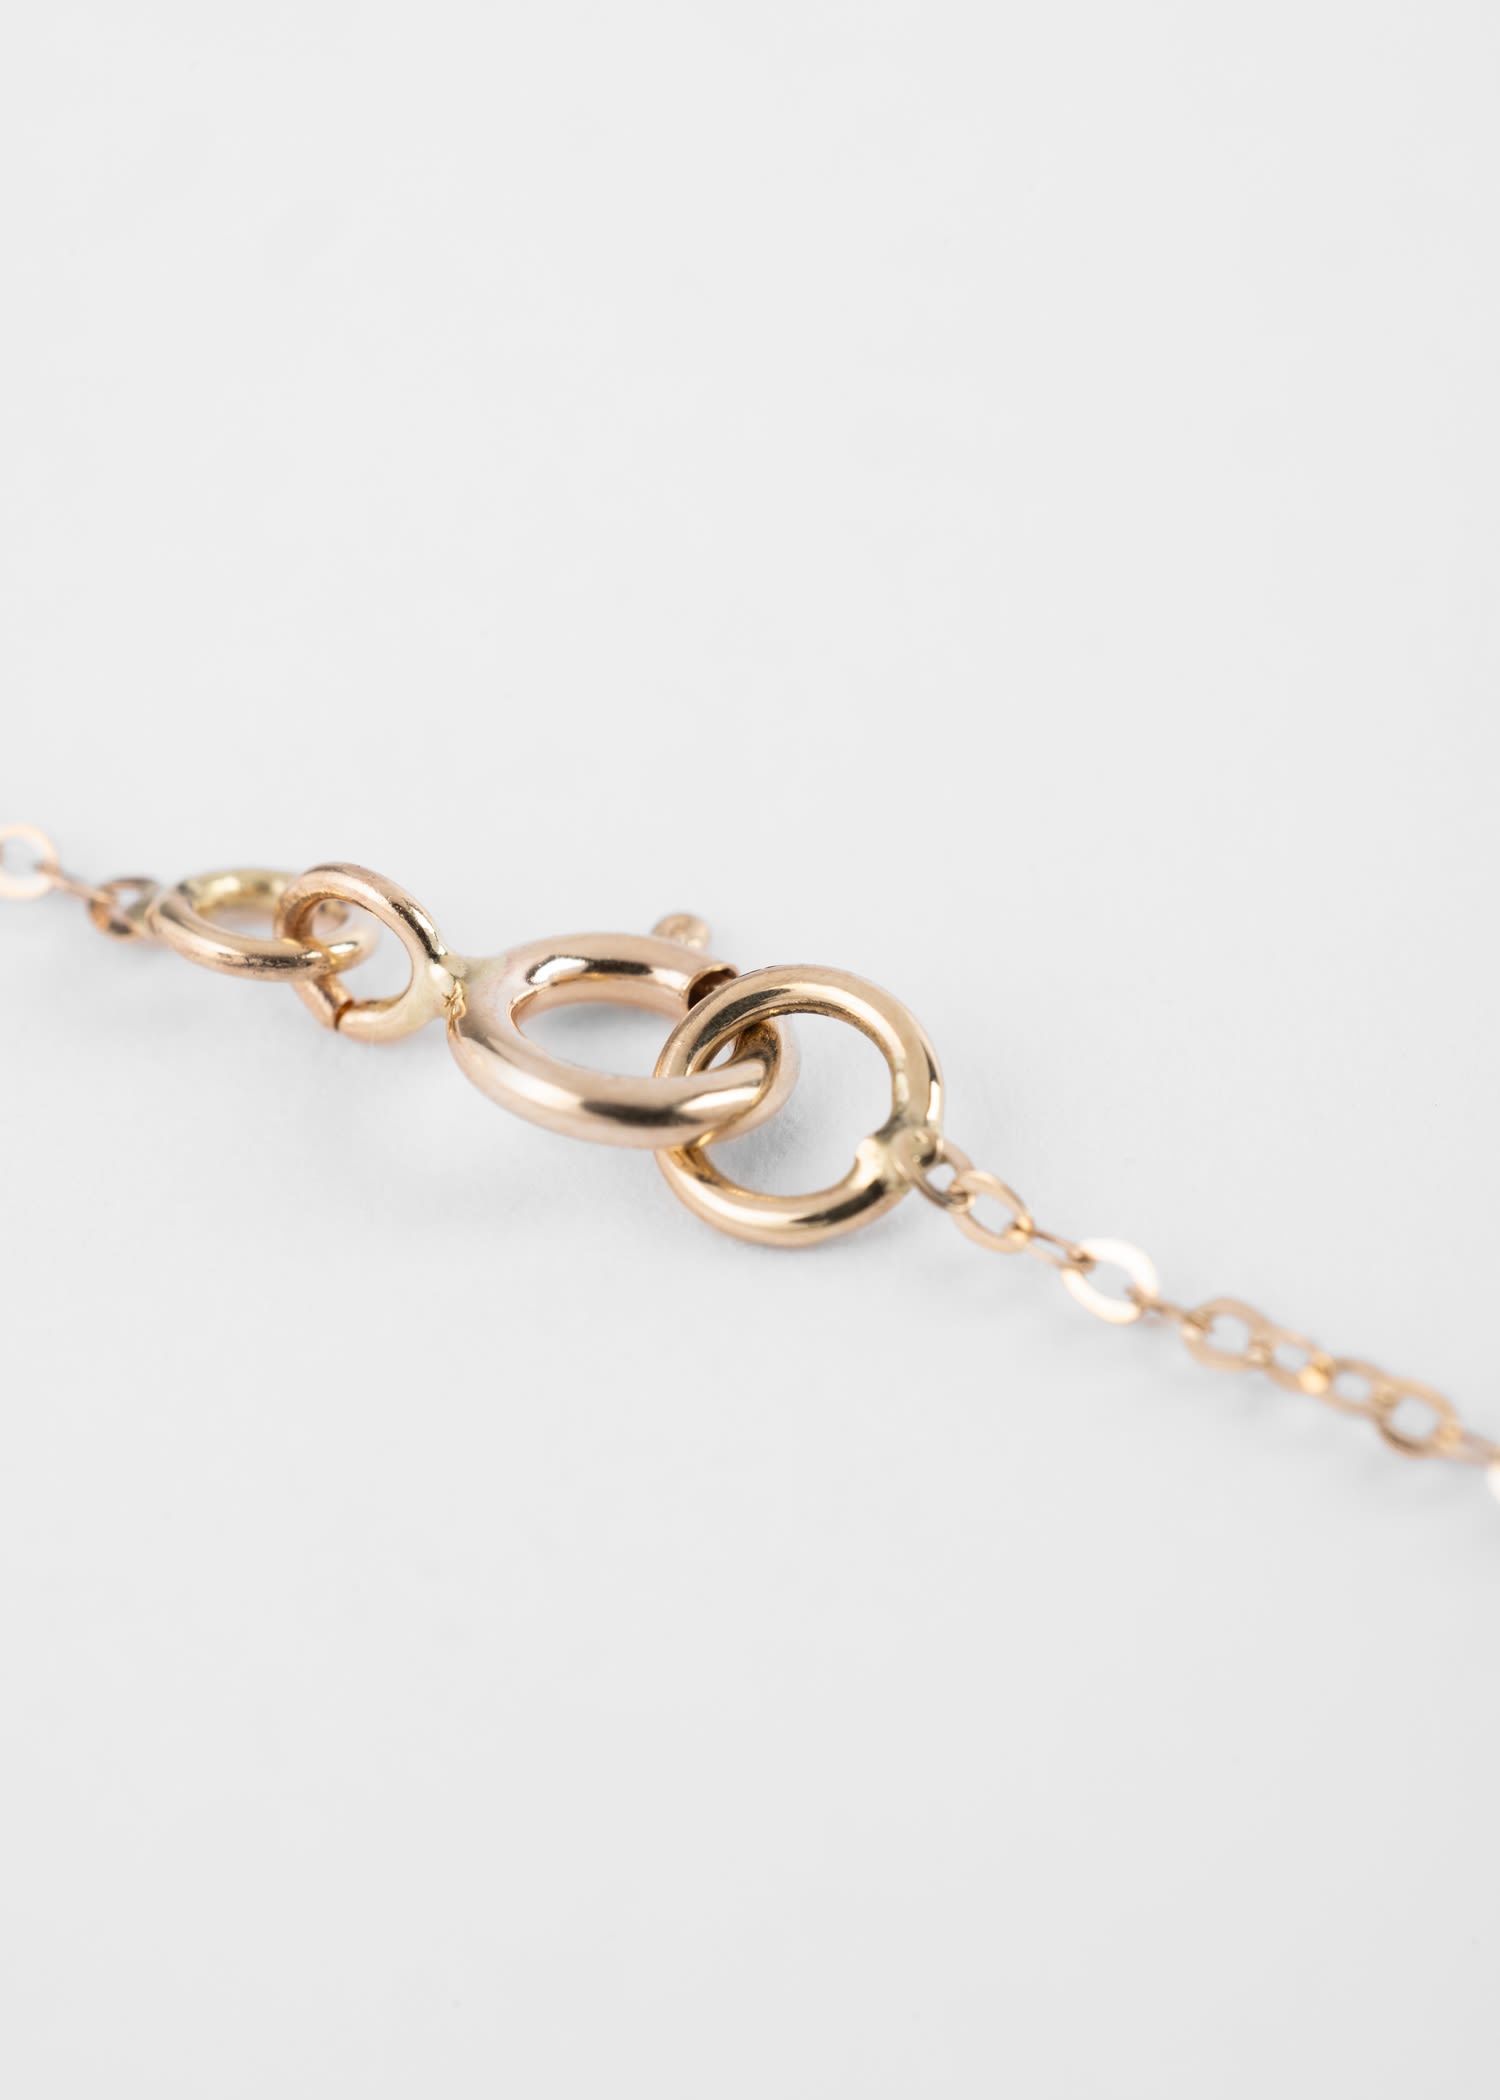 'Charlotte' Gold Double Chain Necklace by Helena Rohner - 3